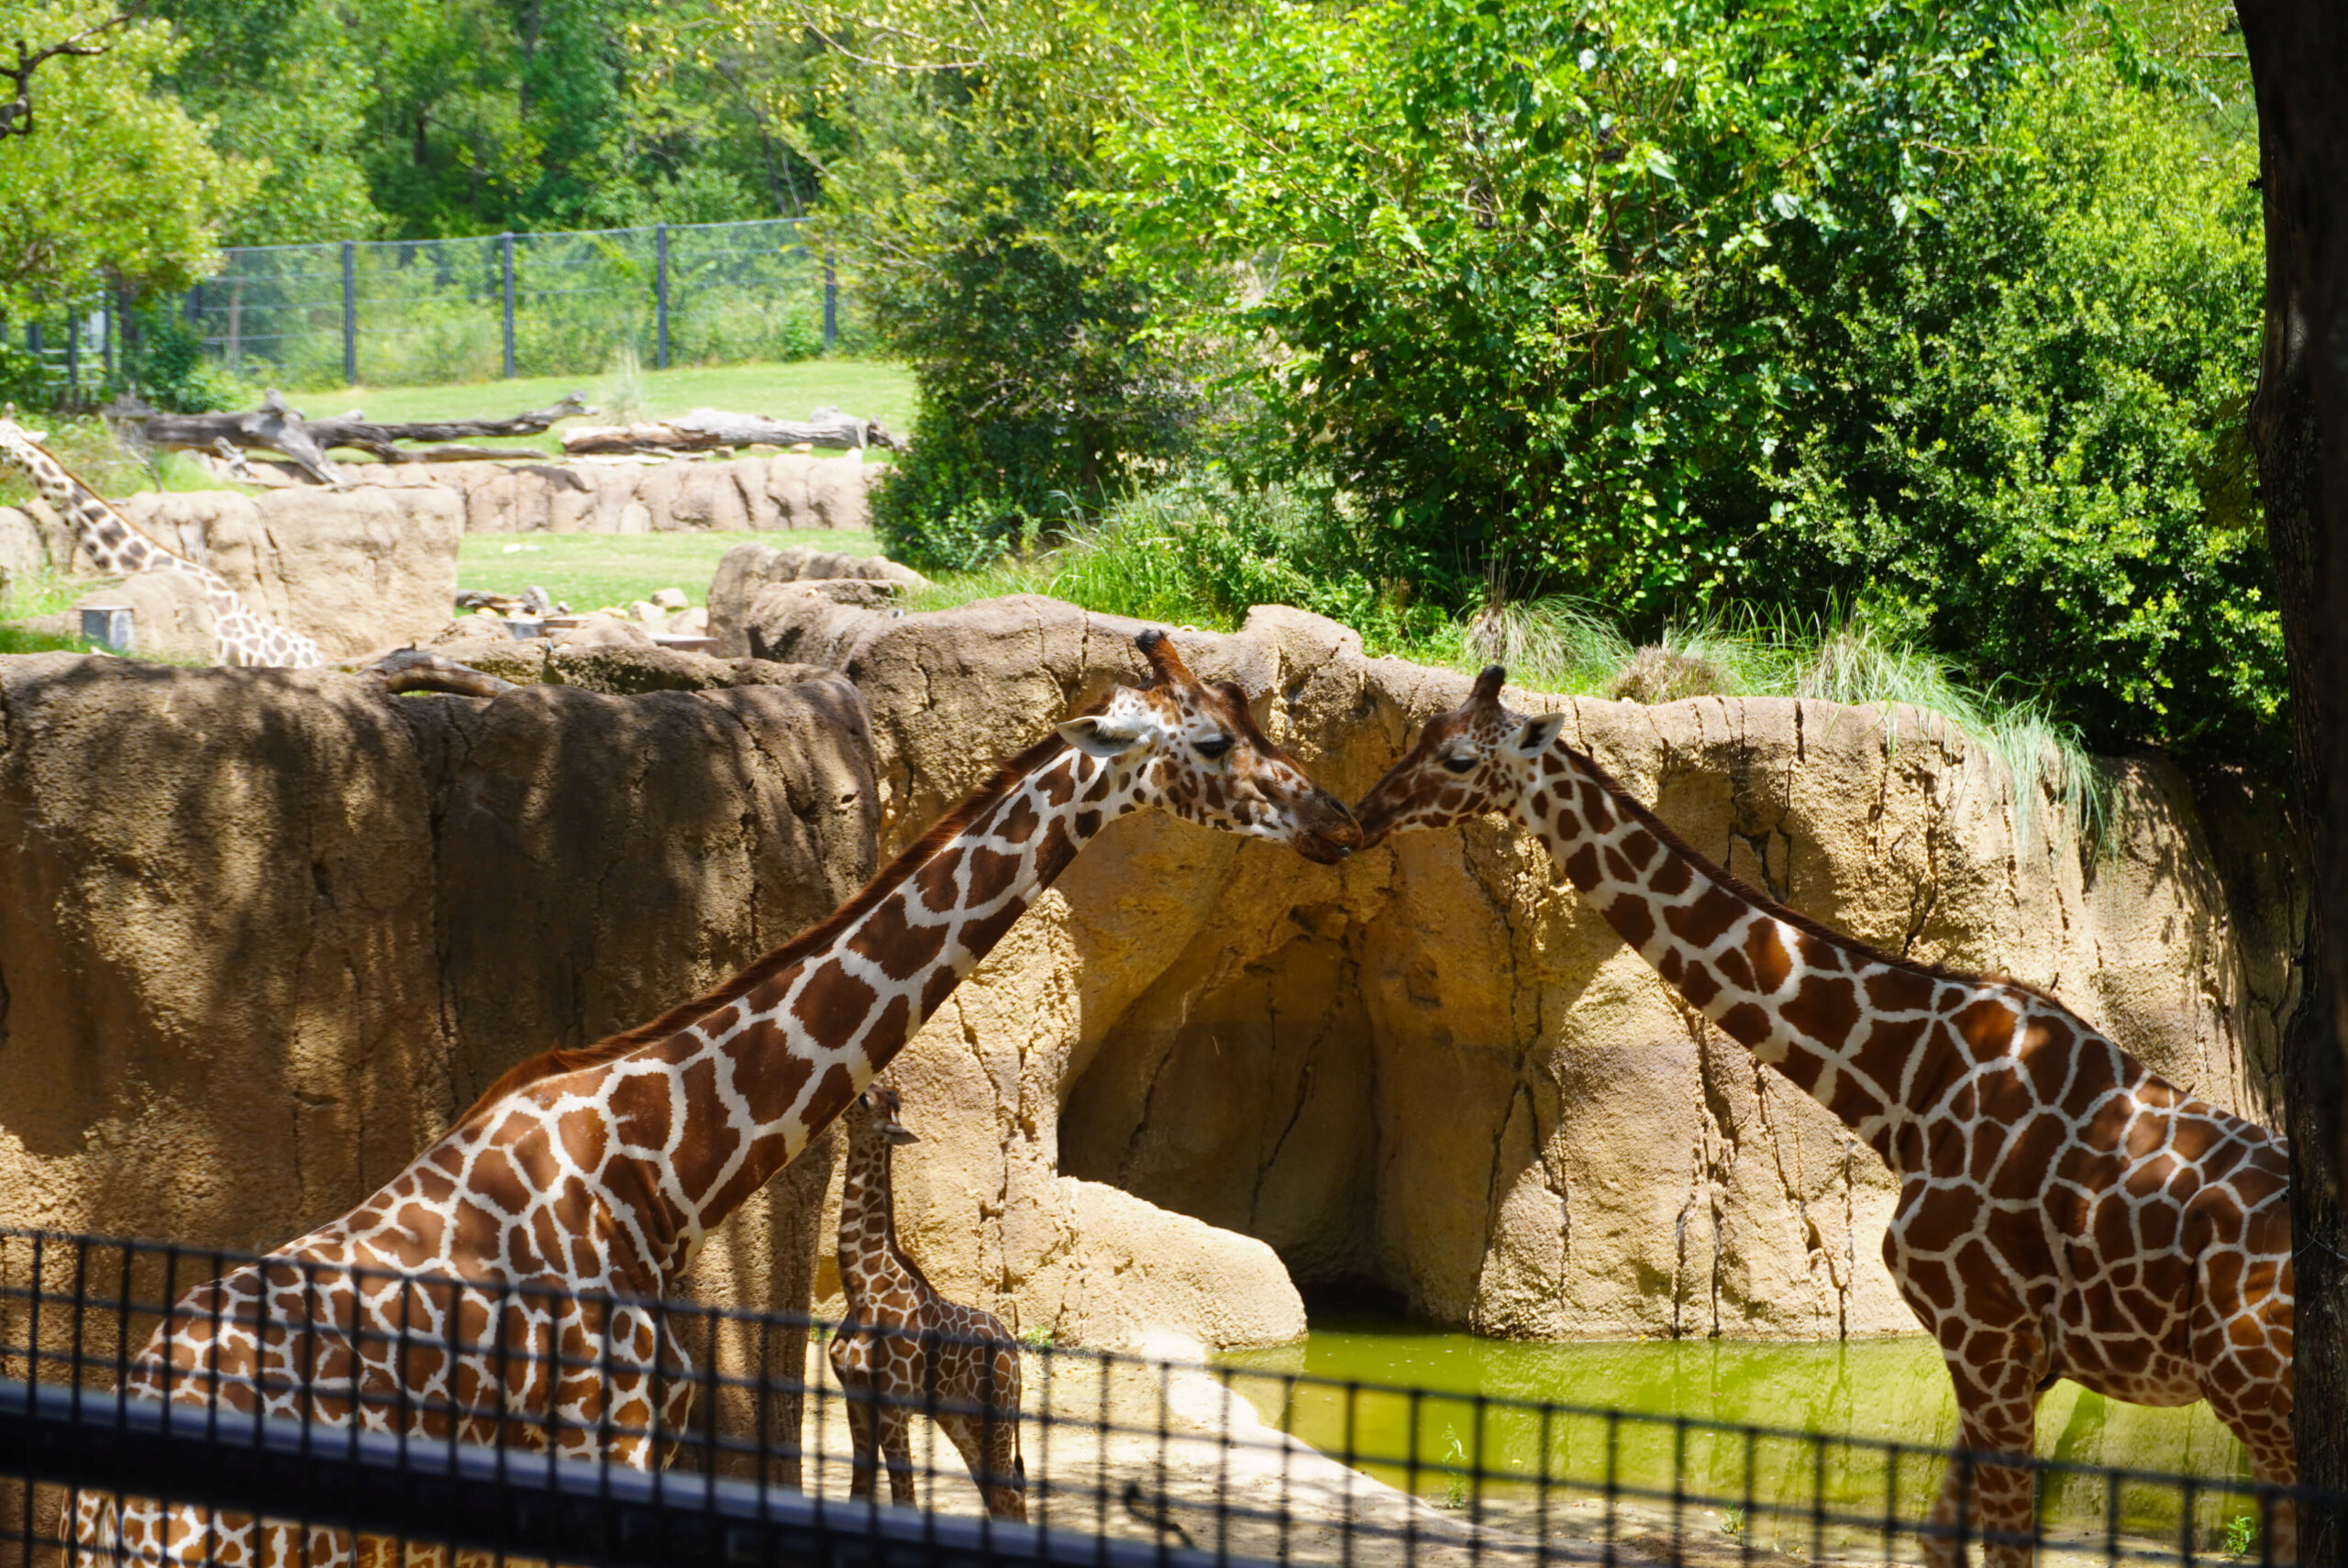 Image of two giraffes interacting with each other.